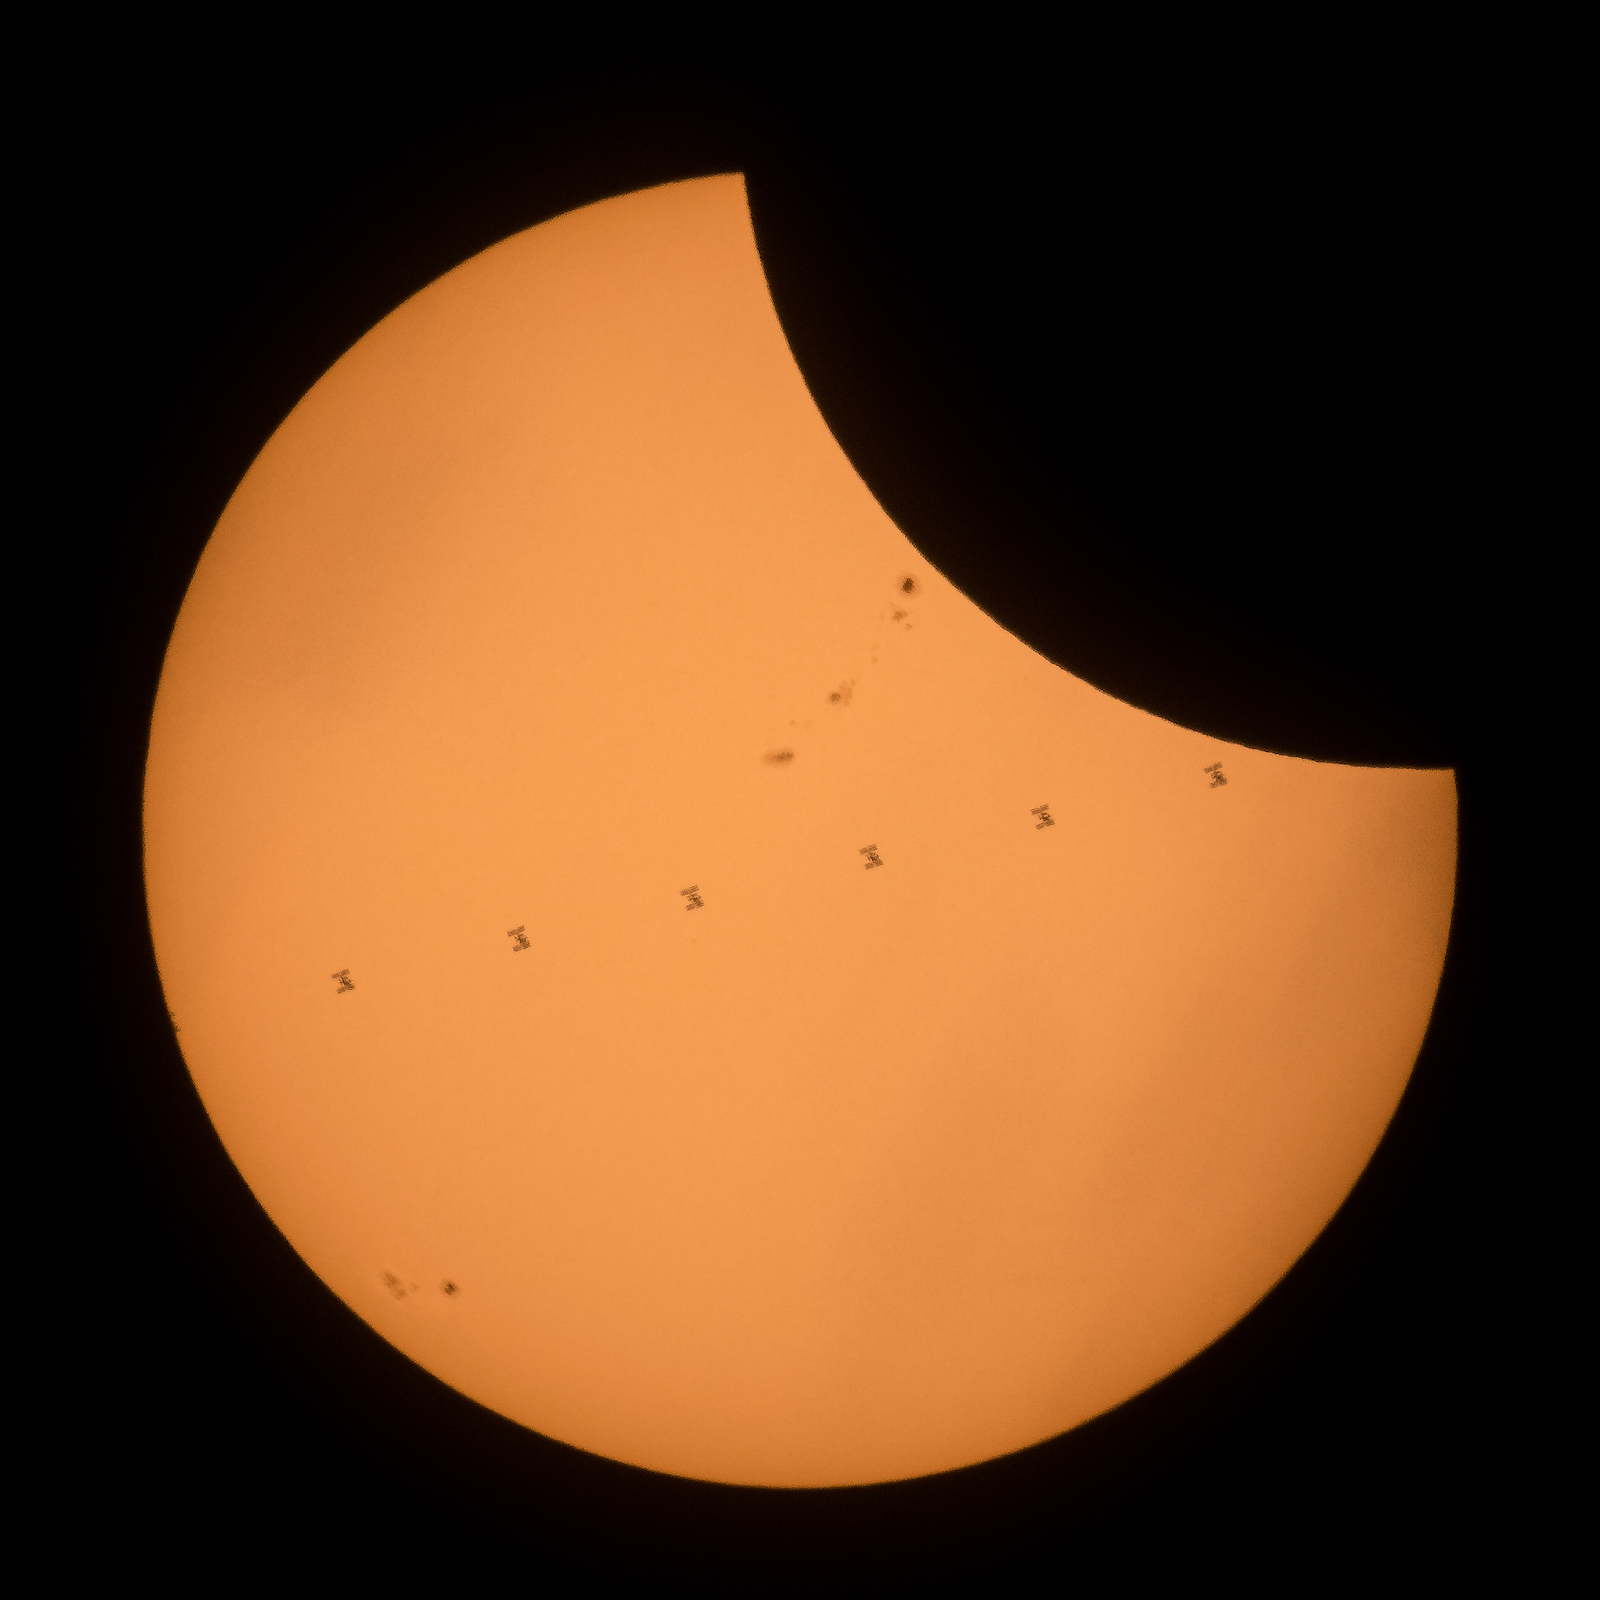 This composite image, made from seven frames, shows the International Space Station, with a crew of six onboard, as it transits the Sun at roughly five miles per second during a partial solar eclipse, Monday, Aug. 21, 2017 near Banner, Wyoming. Onboard as part of Expedition 52 are: NASA astronauts Peggy Whitson, Jack Fischer, and Randy Bresnik; Russian cosmonauts Fyodor Yurchikhin and Sergey Ryazanskiy; and ESA (European Space Agency) astronaut Paolo Nespoli. A total solar eclipse swept across a narrow portion of the contiguous United States from Lincoln Beach, Oregon to Charleston, South Carolina. A partial solar eclipse was visible across the entire North American continent along with parts of South America, Africa, and Europe.  Photo Credit: (NASA/Joel Kowsky)